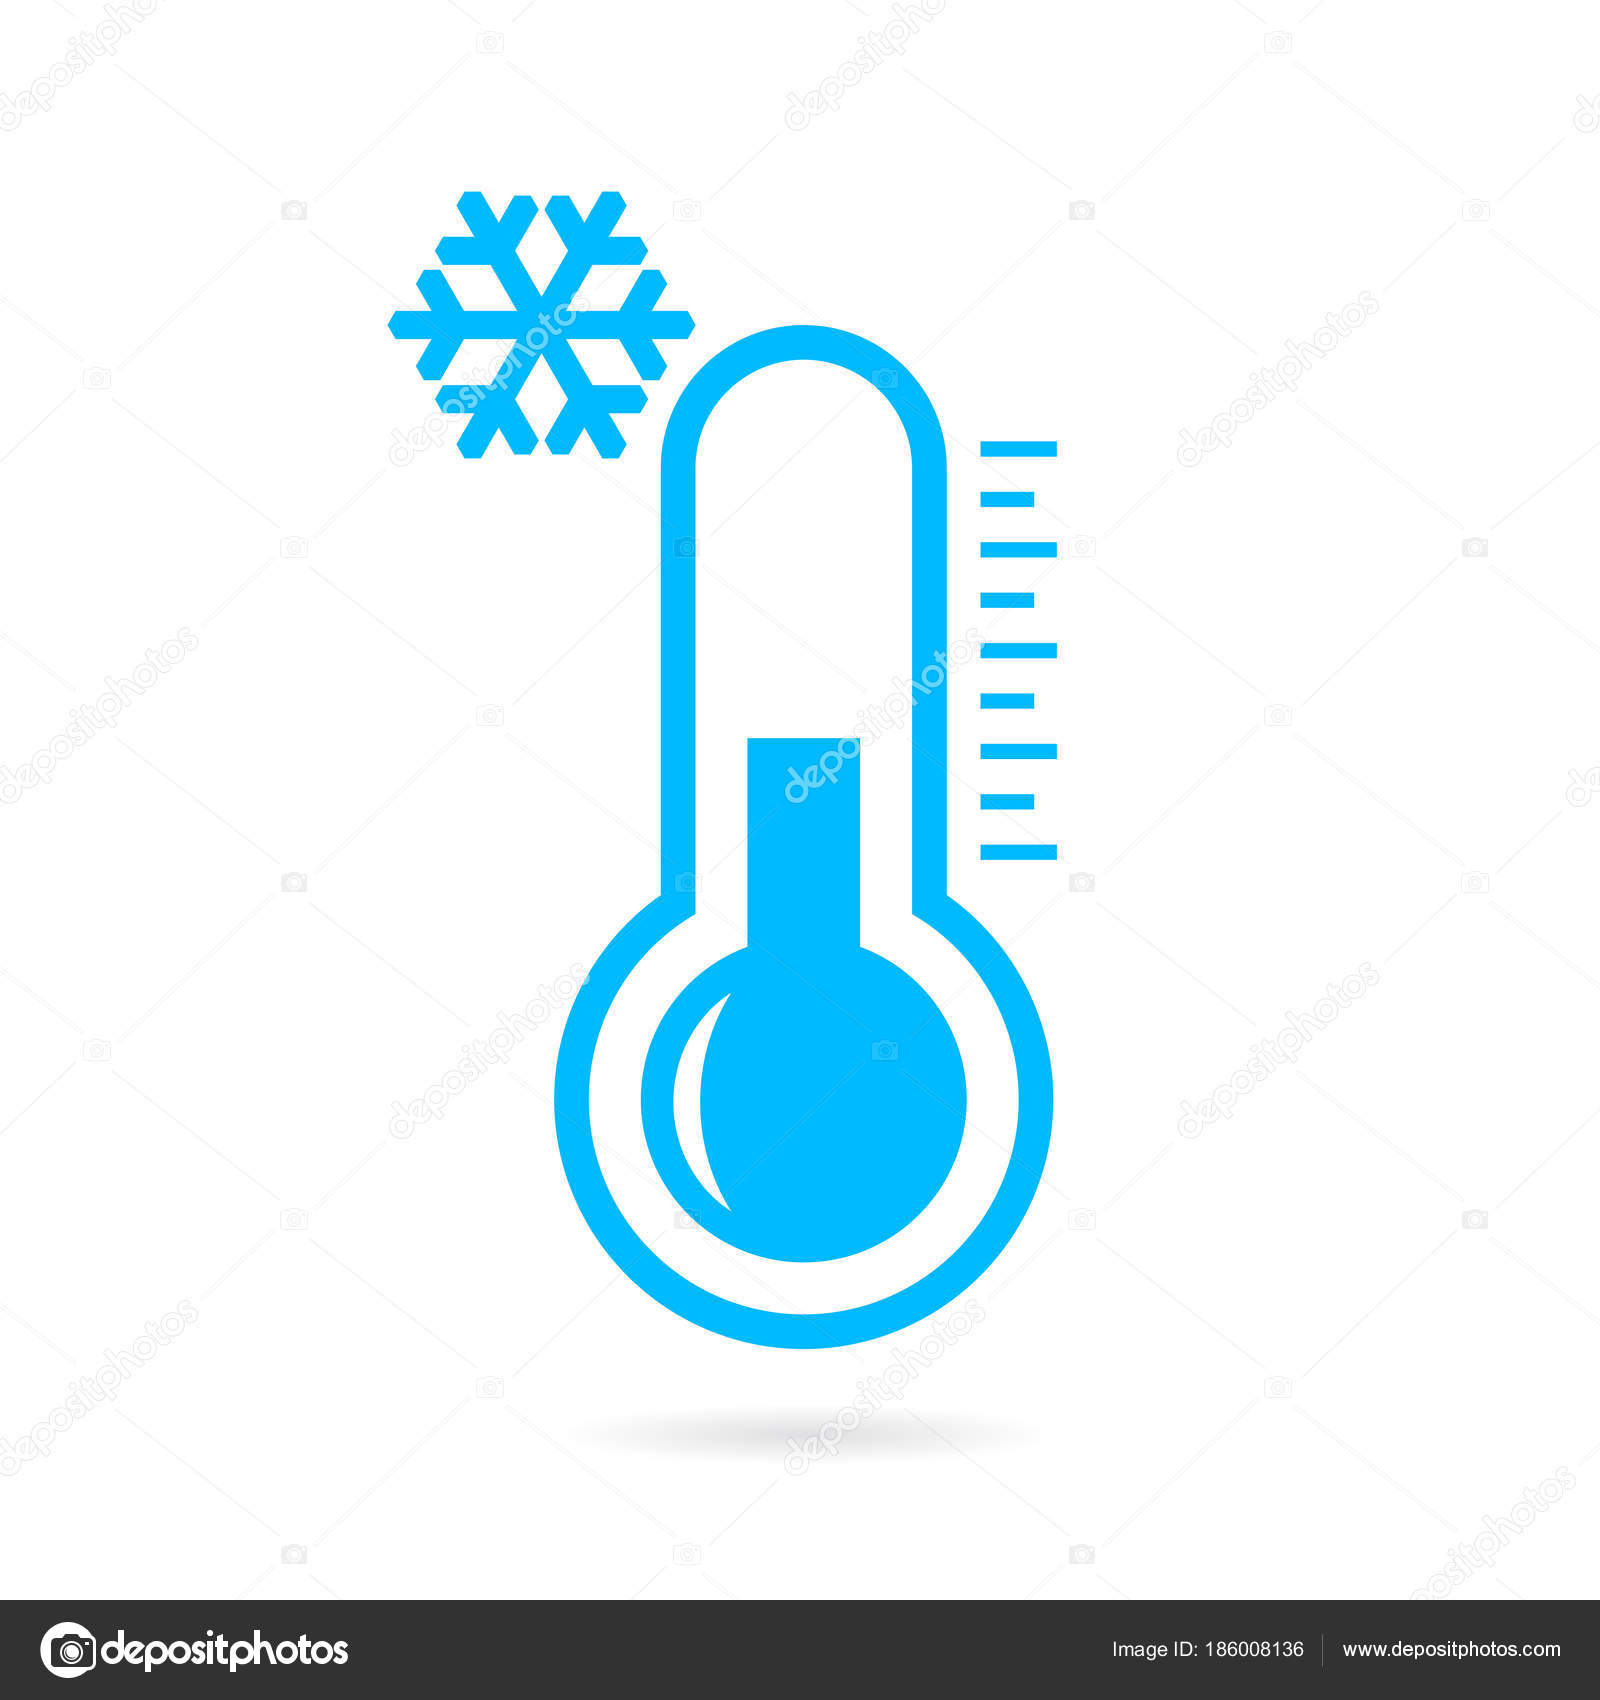 Hot and cold weather icons thermometers isolated Vector Image